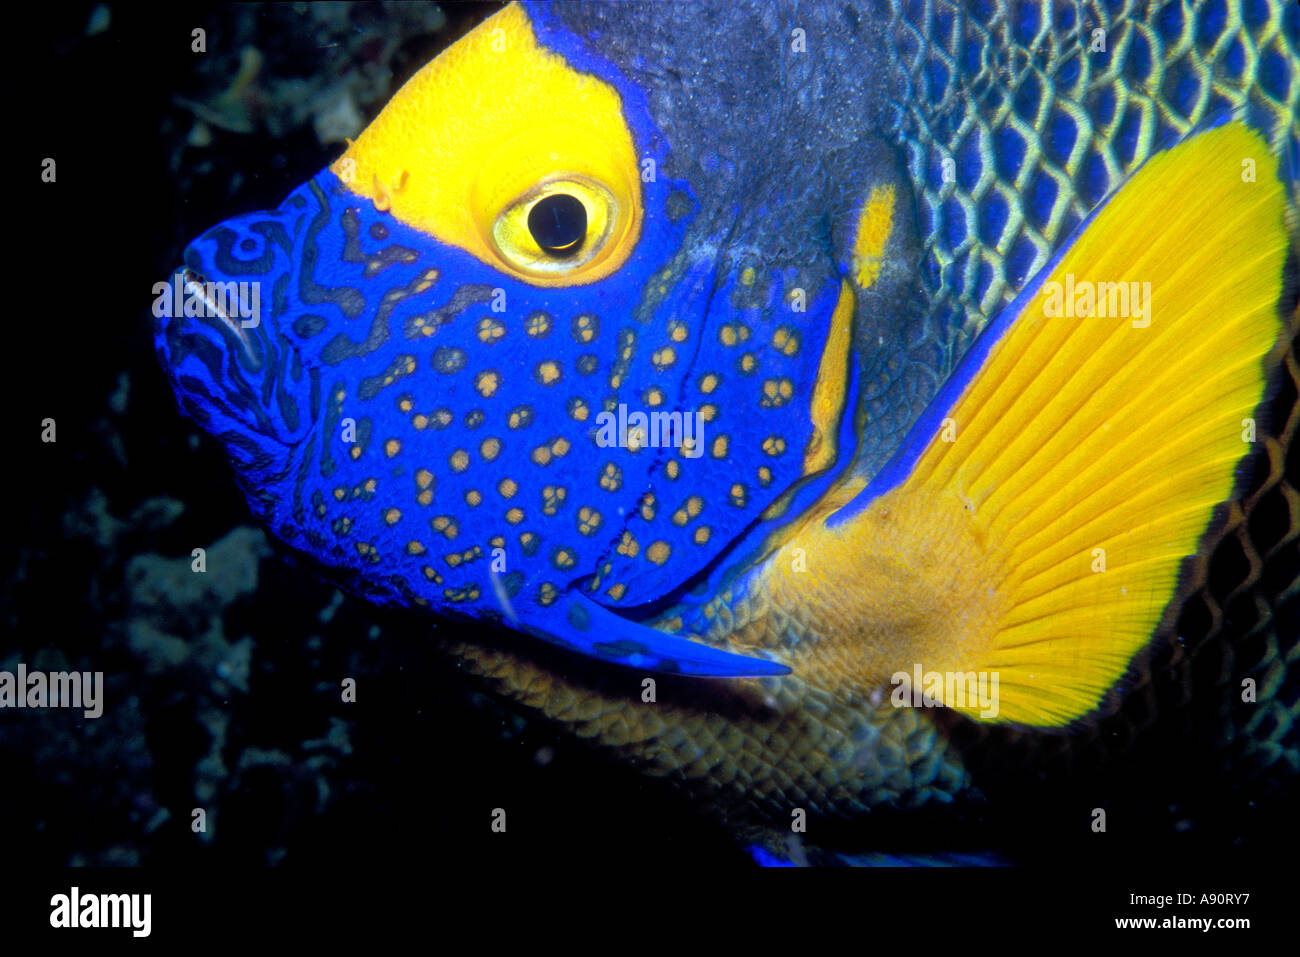 UF-106 YELLOW-FACED ANGELFISH Banque D'Images